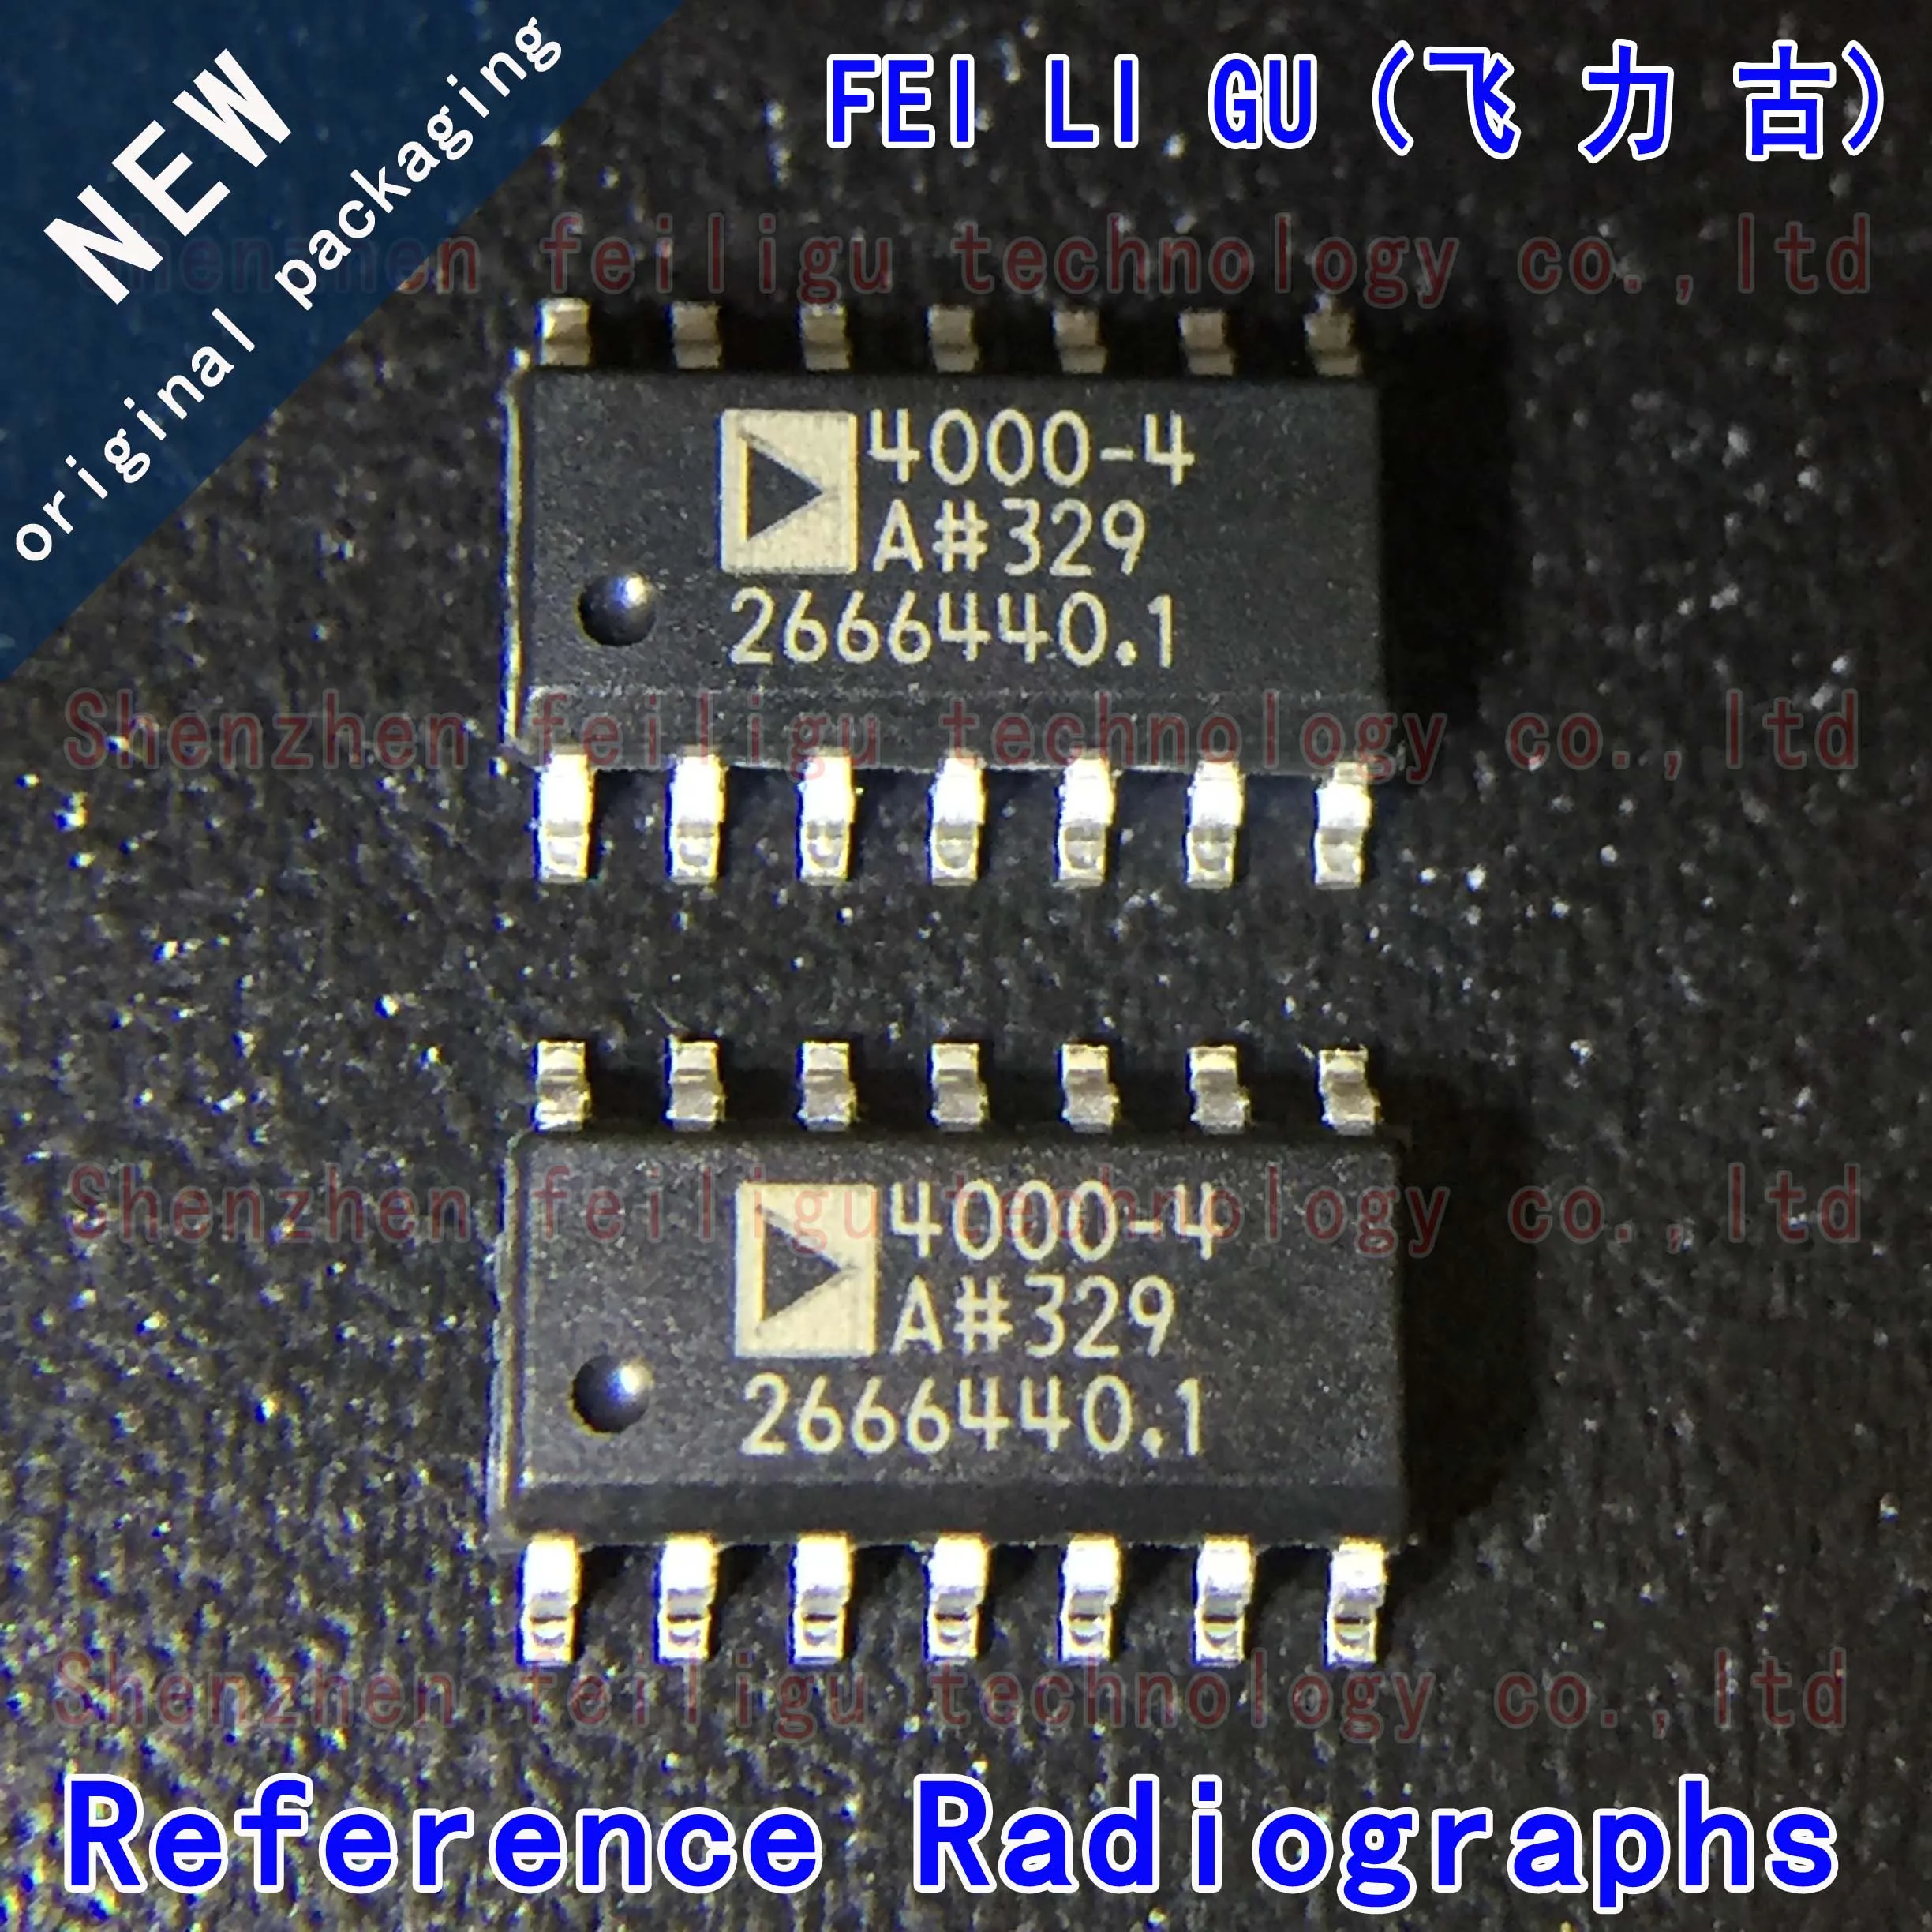 100% New original ADA4000-4ARZ-R7 ADA4000-4ARZ ADA4000-4AR4000-4A 4000-4 Package:SOP14 FET input op amp chip 10pcs new cd4017be cd4017 4000 series cmos logic device chip straight in dip 16 cd4017be integrated circuit